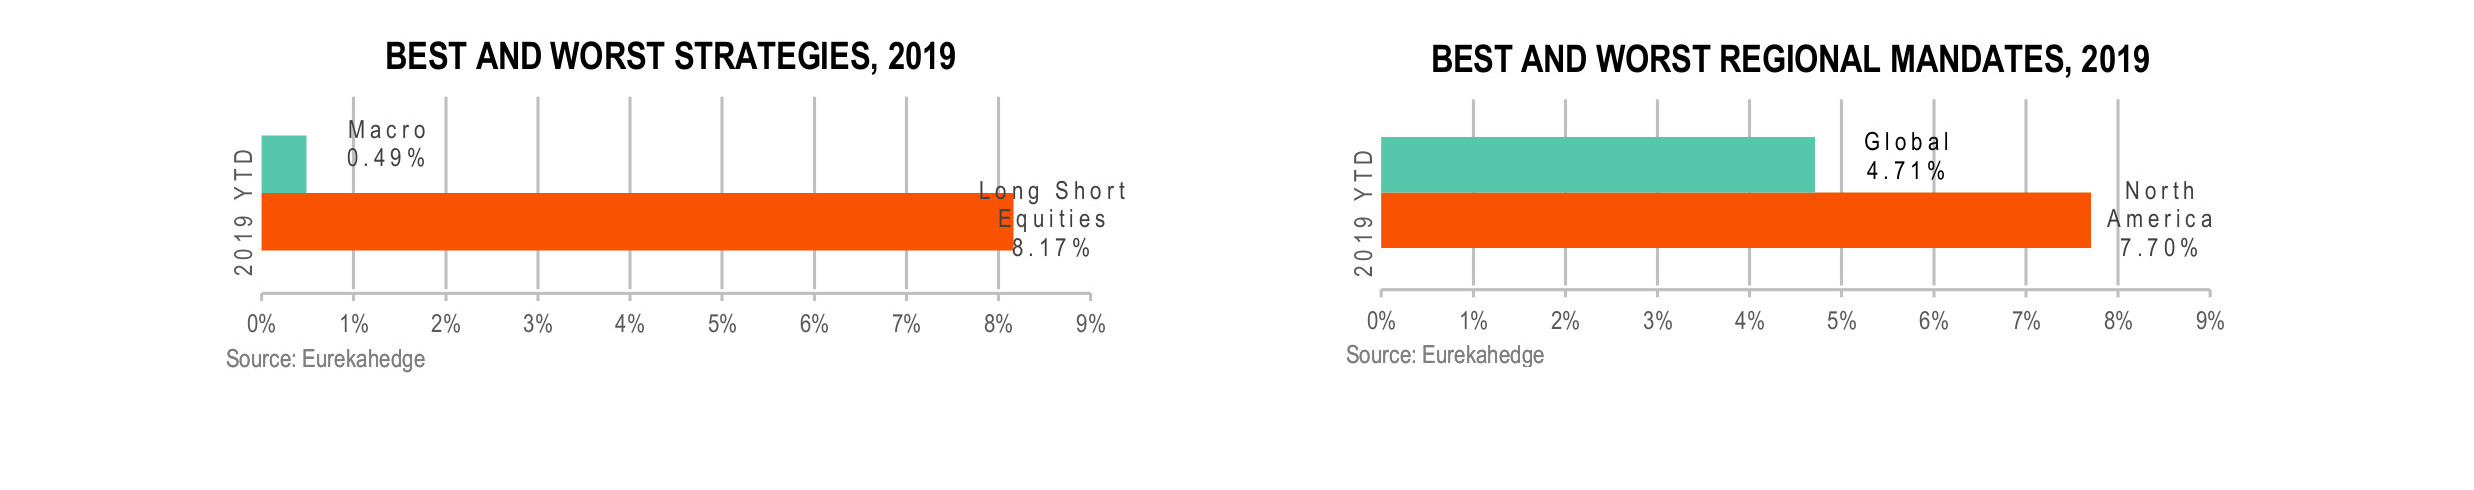 Funds of Hedge Funds Infographic June 2019 - best and worst strategy and regional mandate 2019